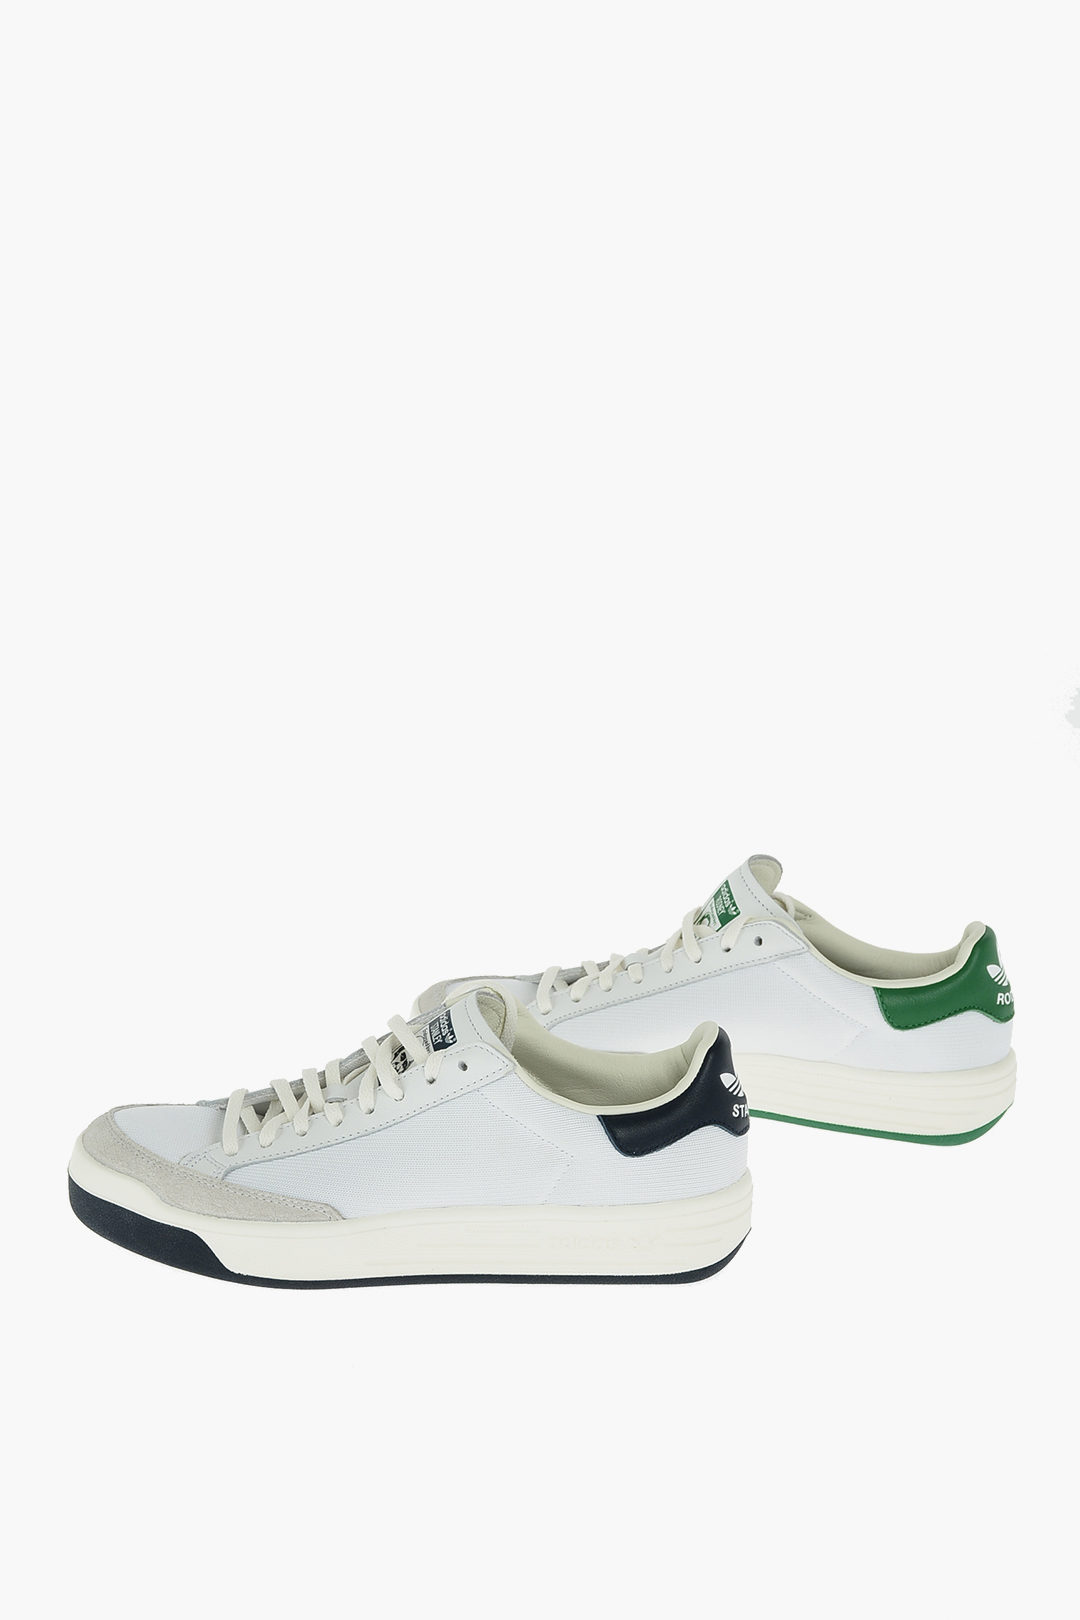 Adidas Fabric ROD LAVER sneakers with leather details men - Glamood Outlet